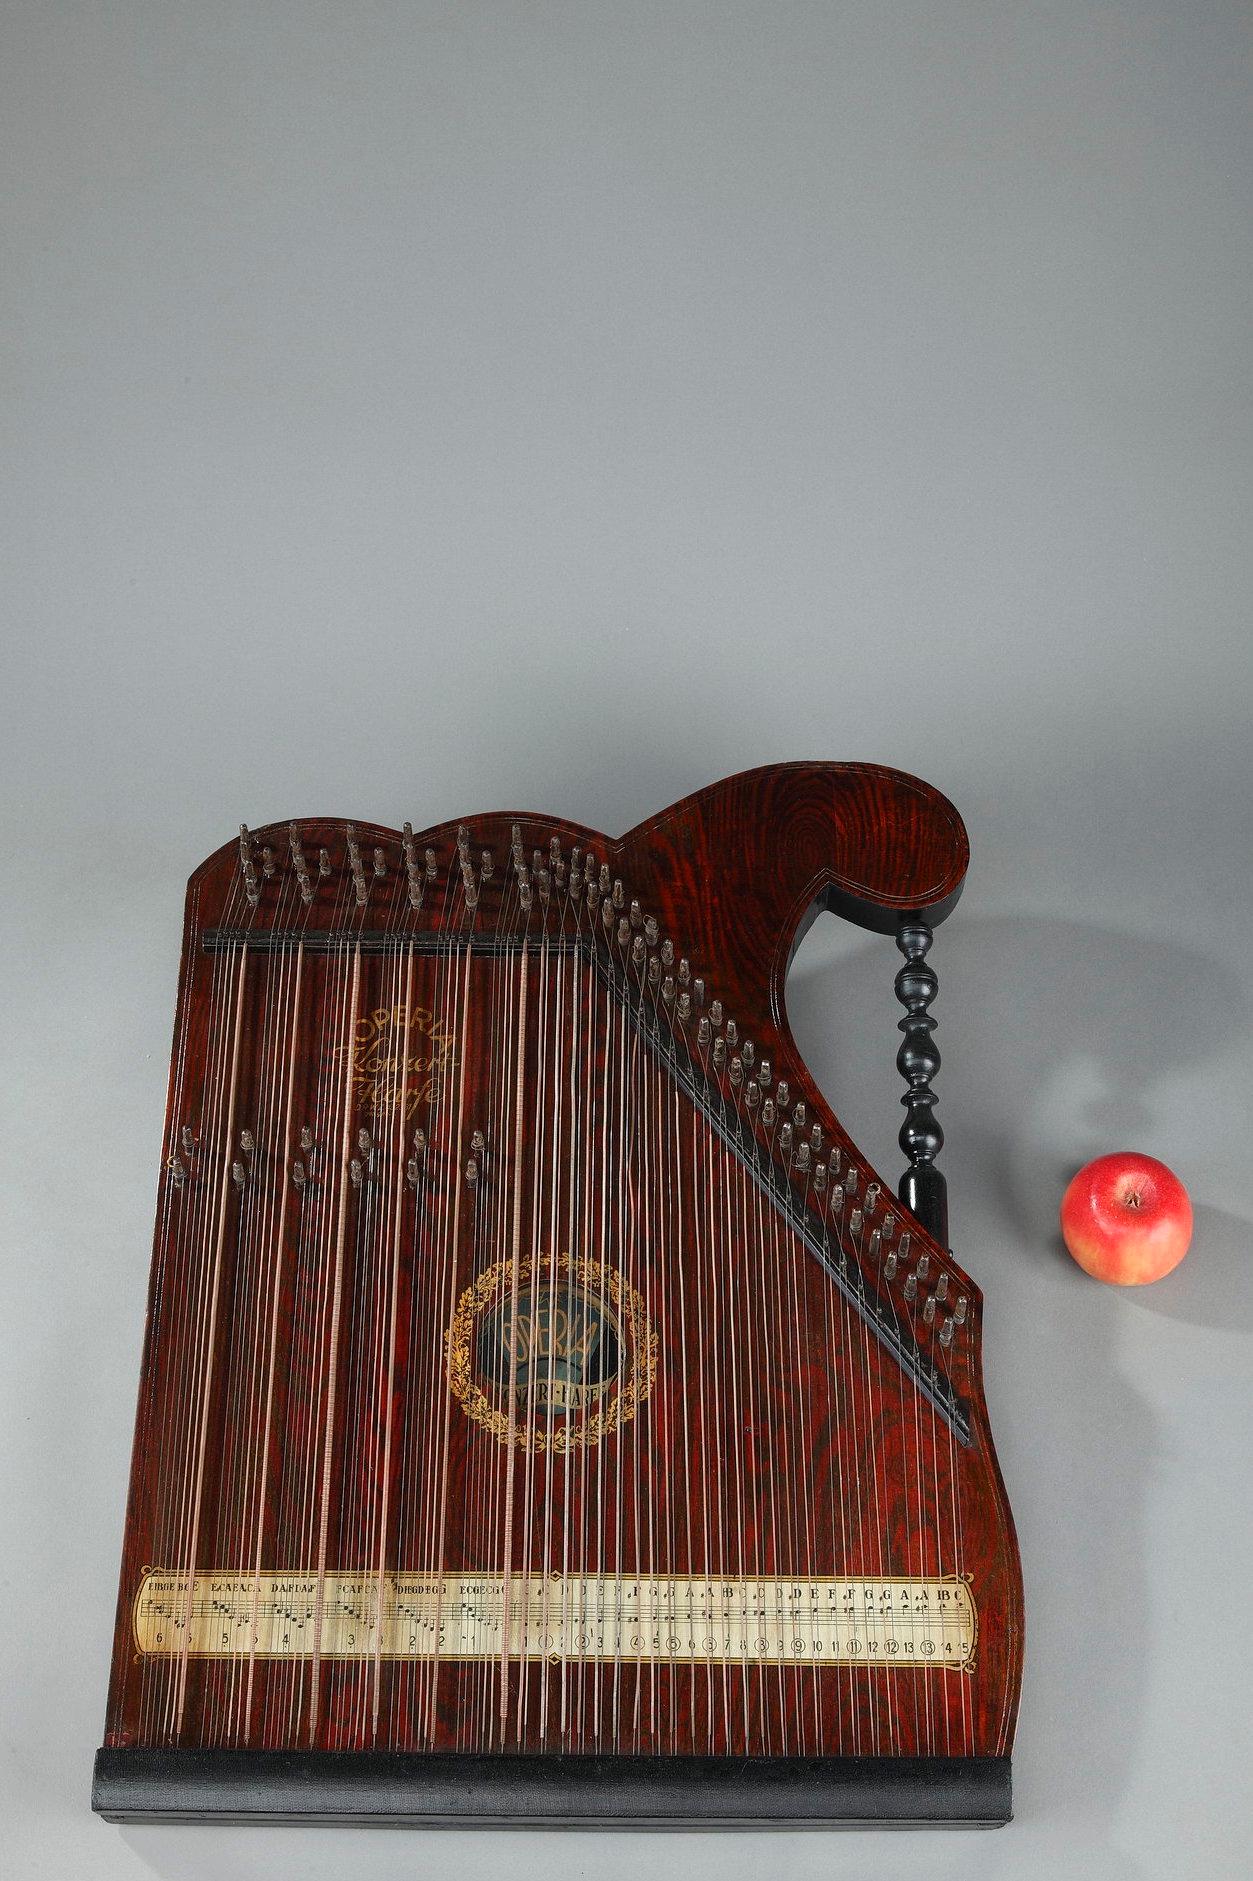 Table zither in painted wood. The handle is made of turned blackened wood. The rosette of the resonance box is decorated with a crown of oak leaves. The tablatures are indicated at the bottom of the instrument. The Operia Konzert-Harfe stamp is